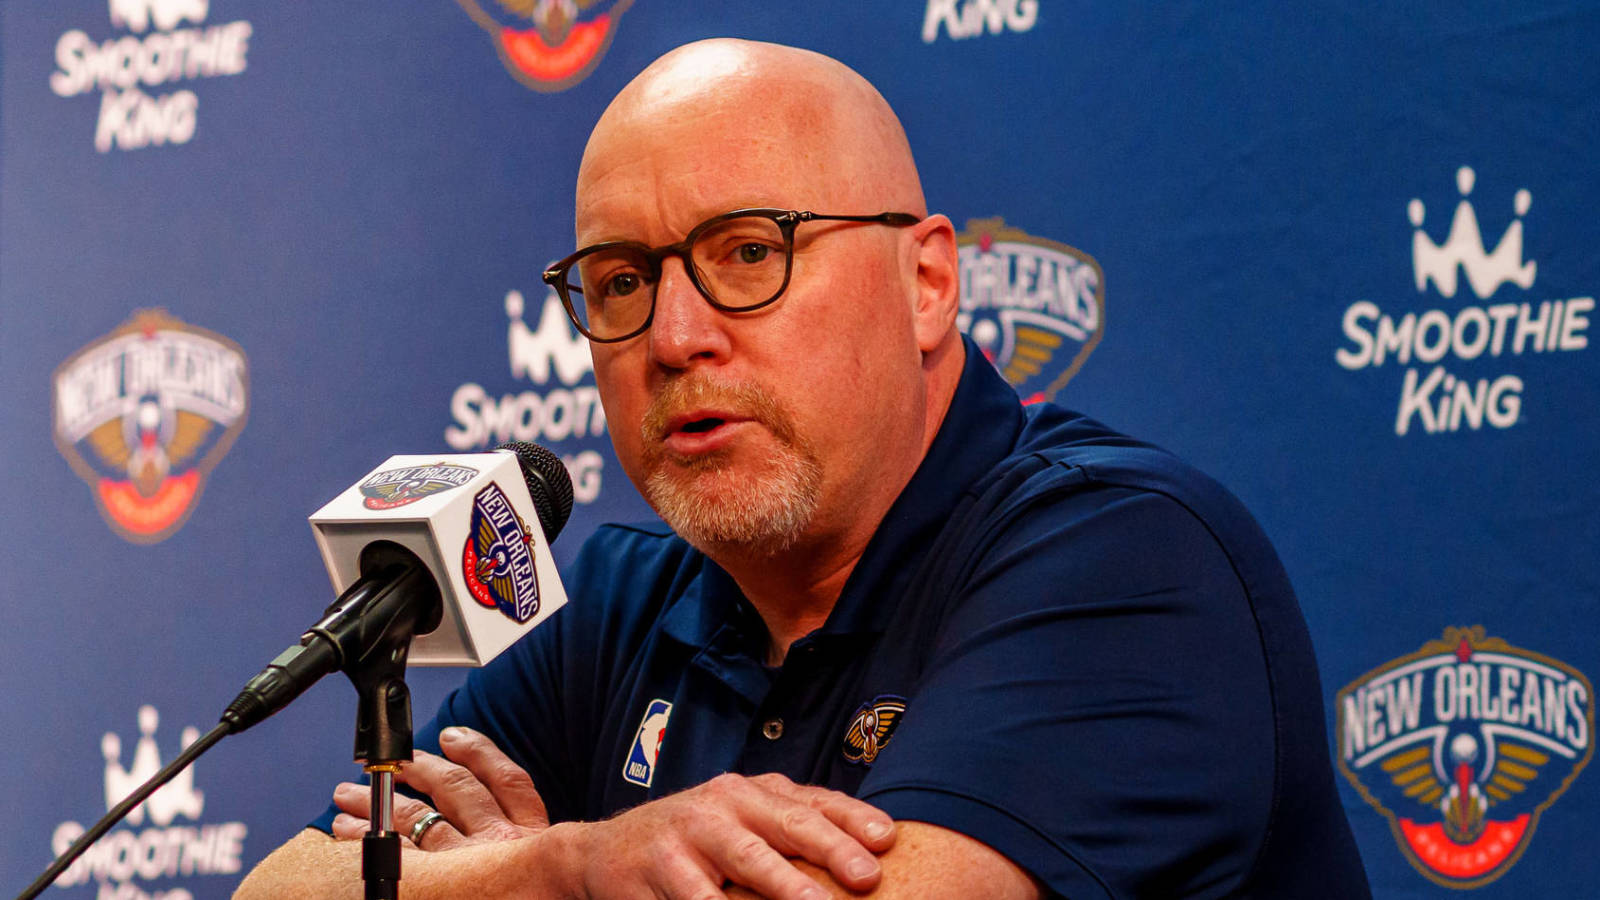 Pelicans executive VP of basketball operations David Griffin reportedly on hot seat